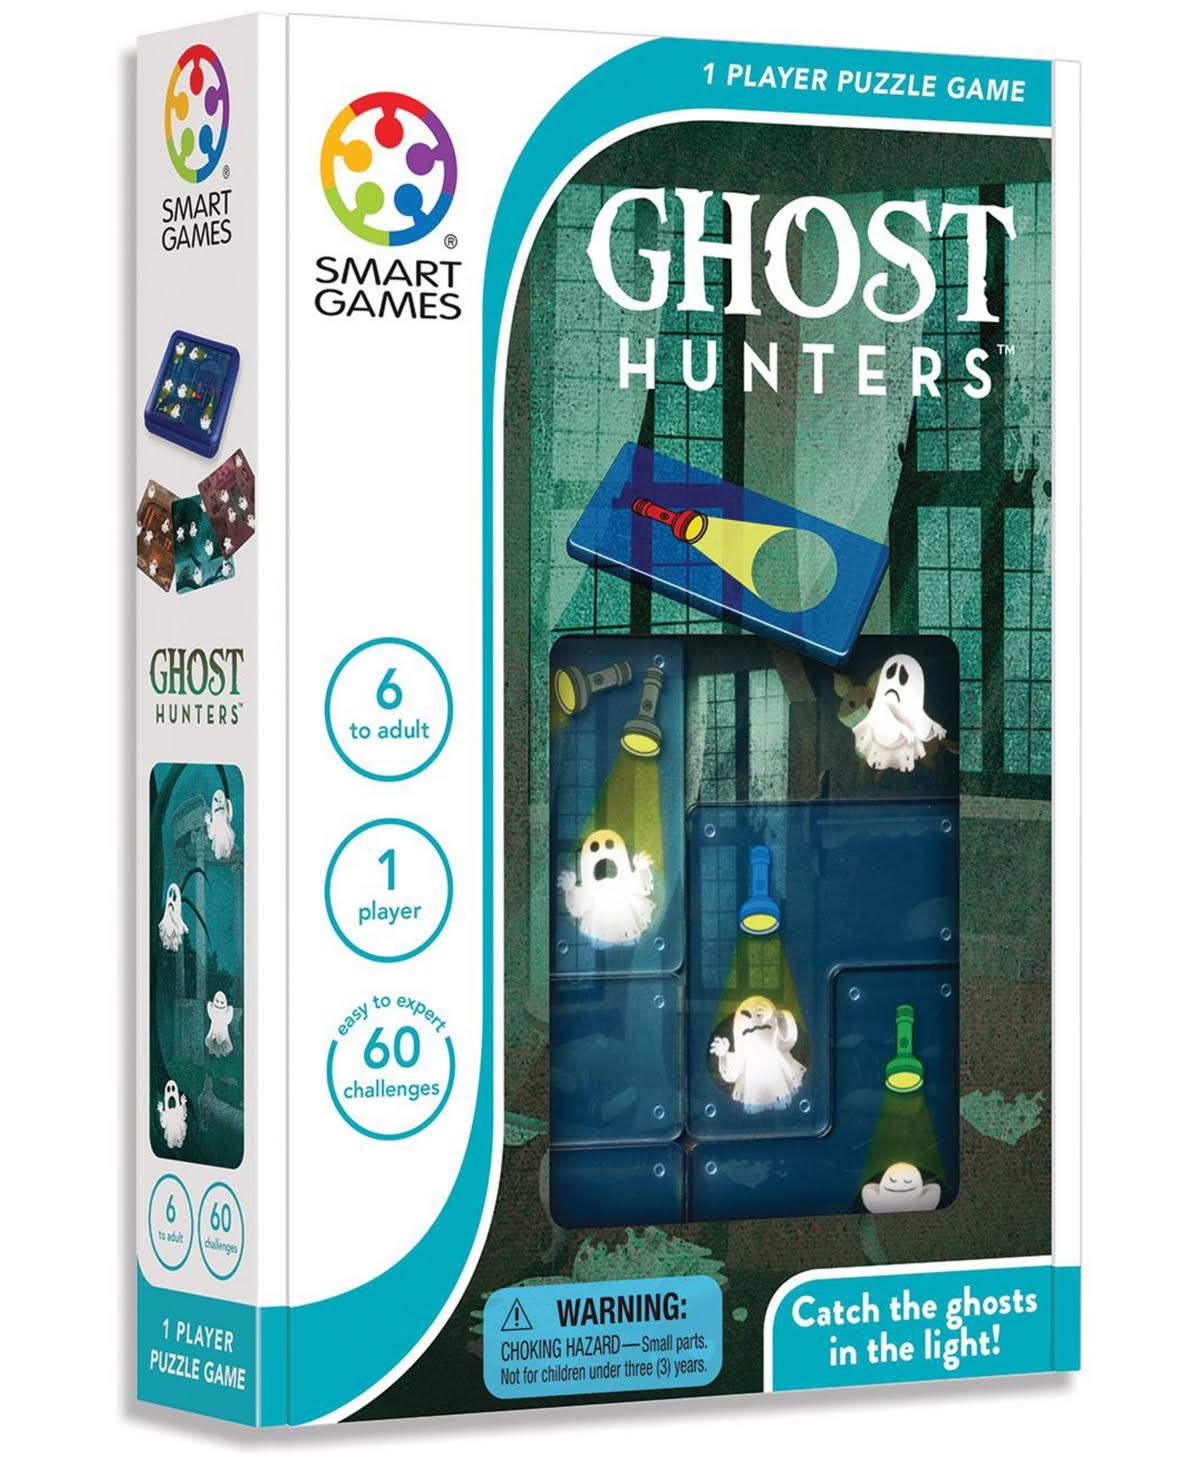 Smart Games Ghost Hunters Puzzle Game